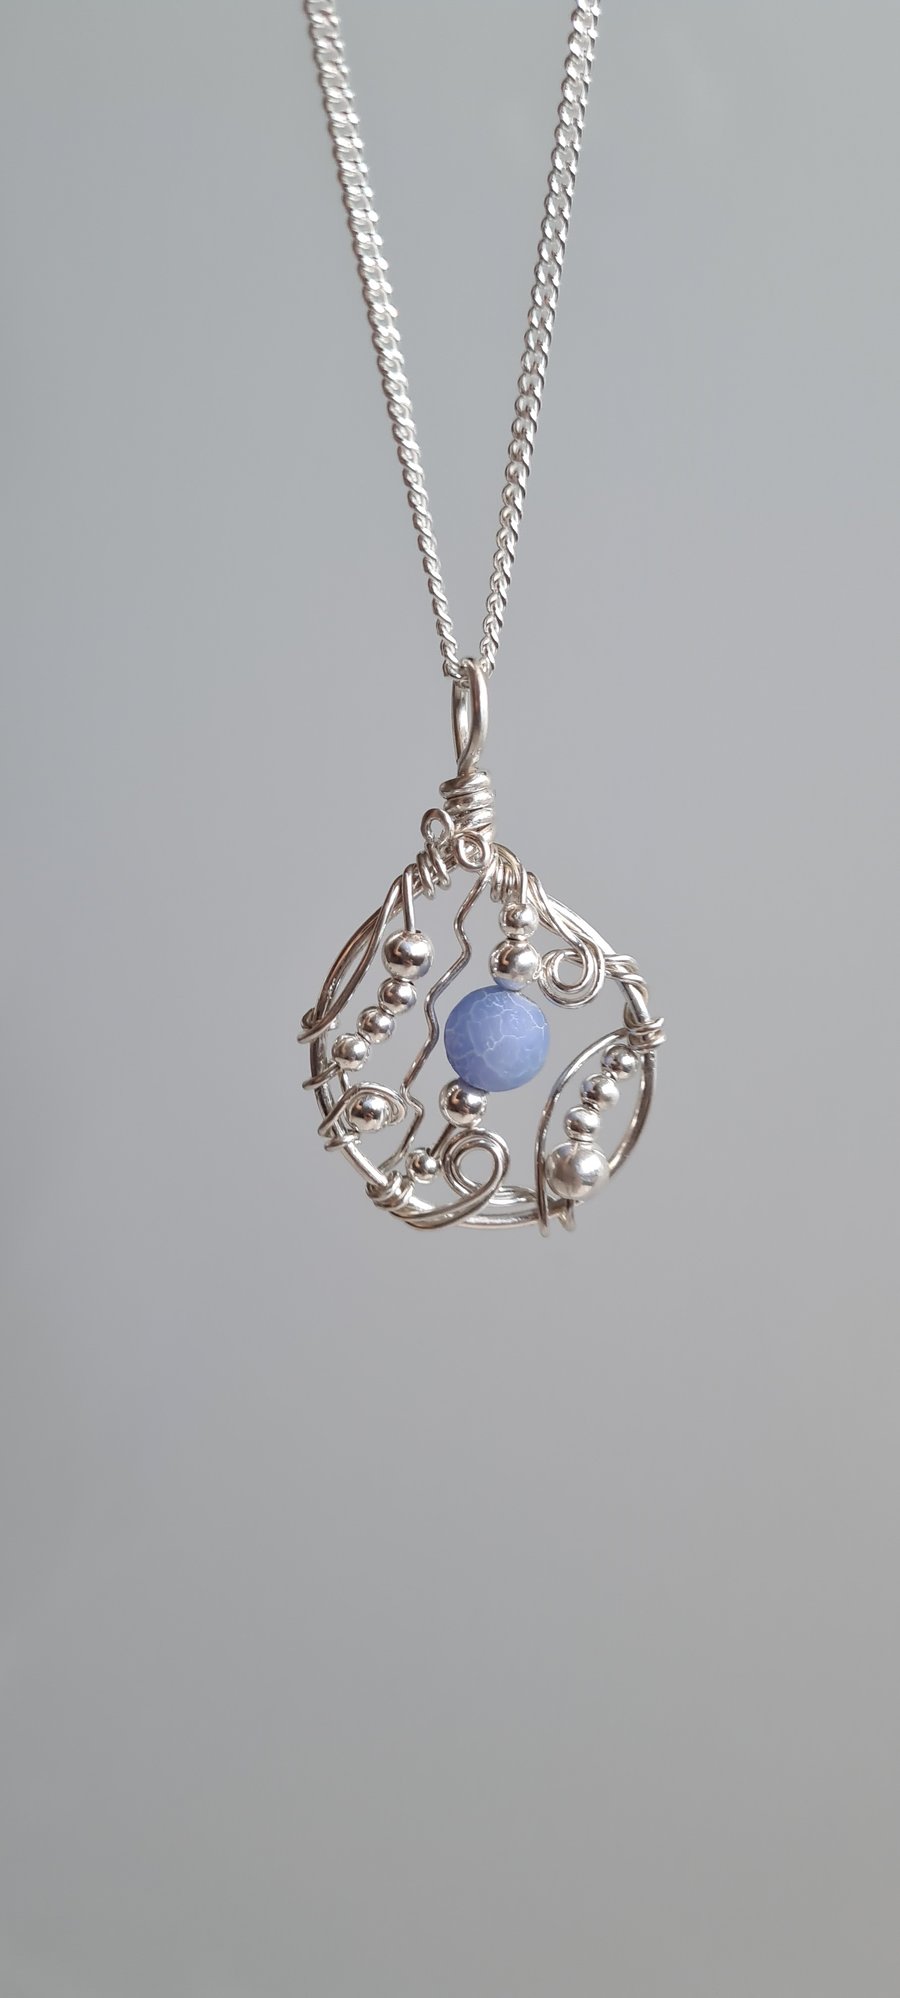 Handmade Unique 925 Silver & Blue Agate Necklace Pendant Gift Boxed Jewellery